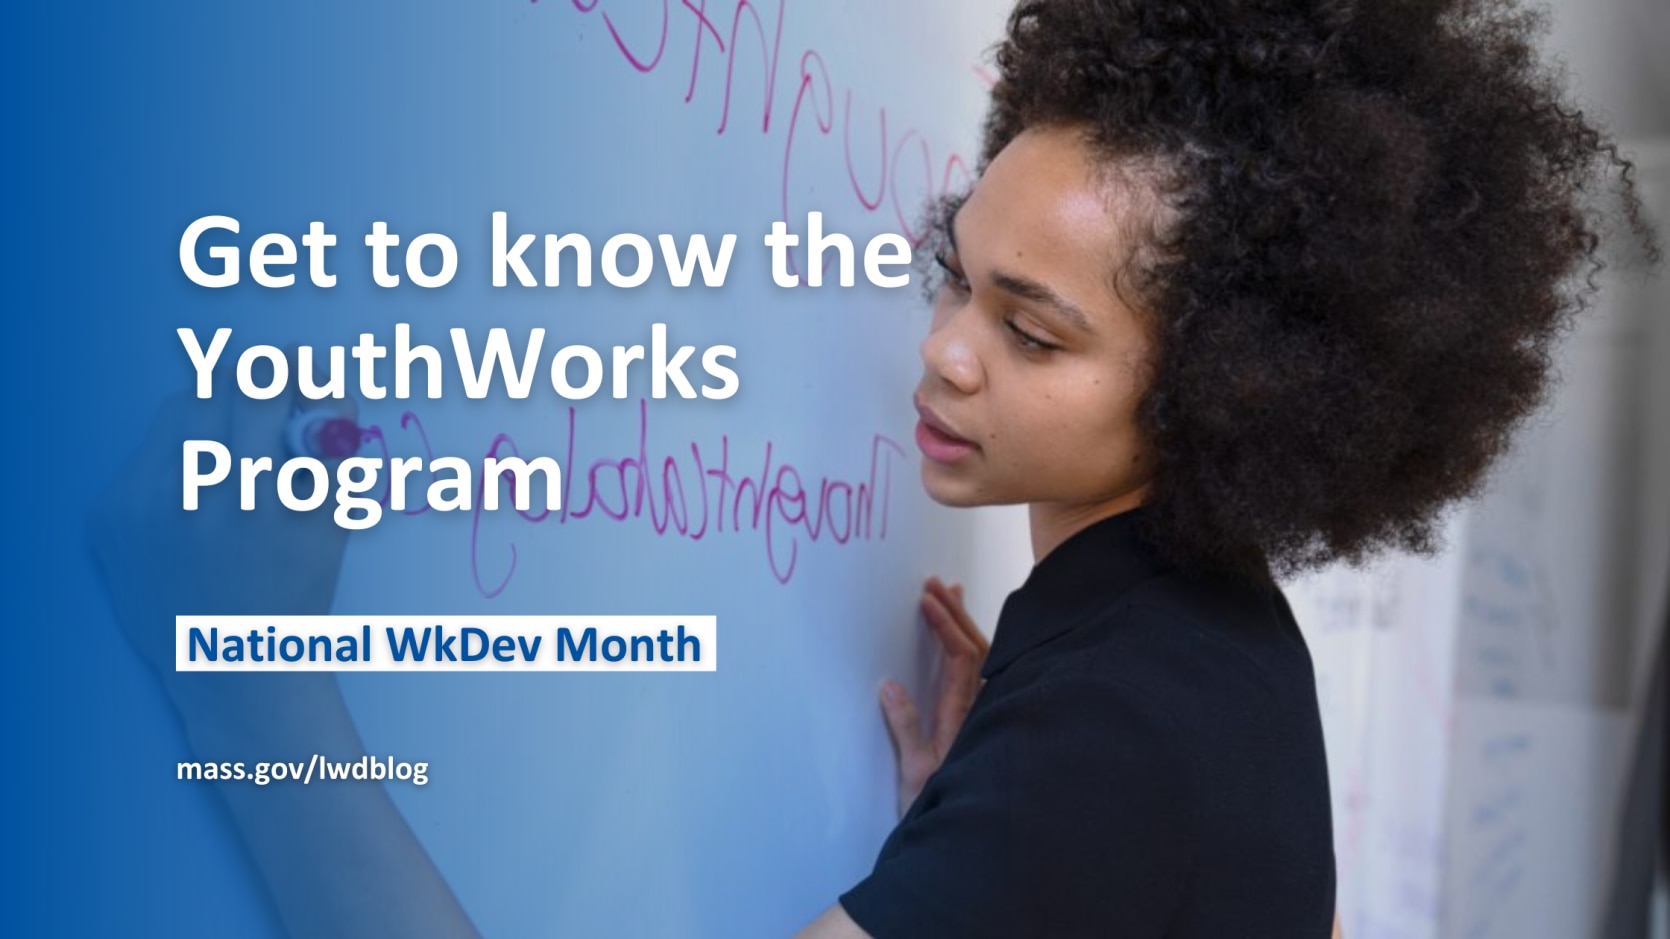 Get to know the YouthWorks program